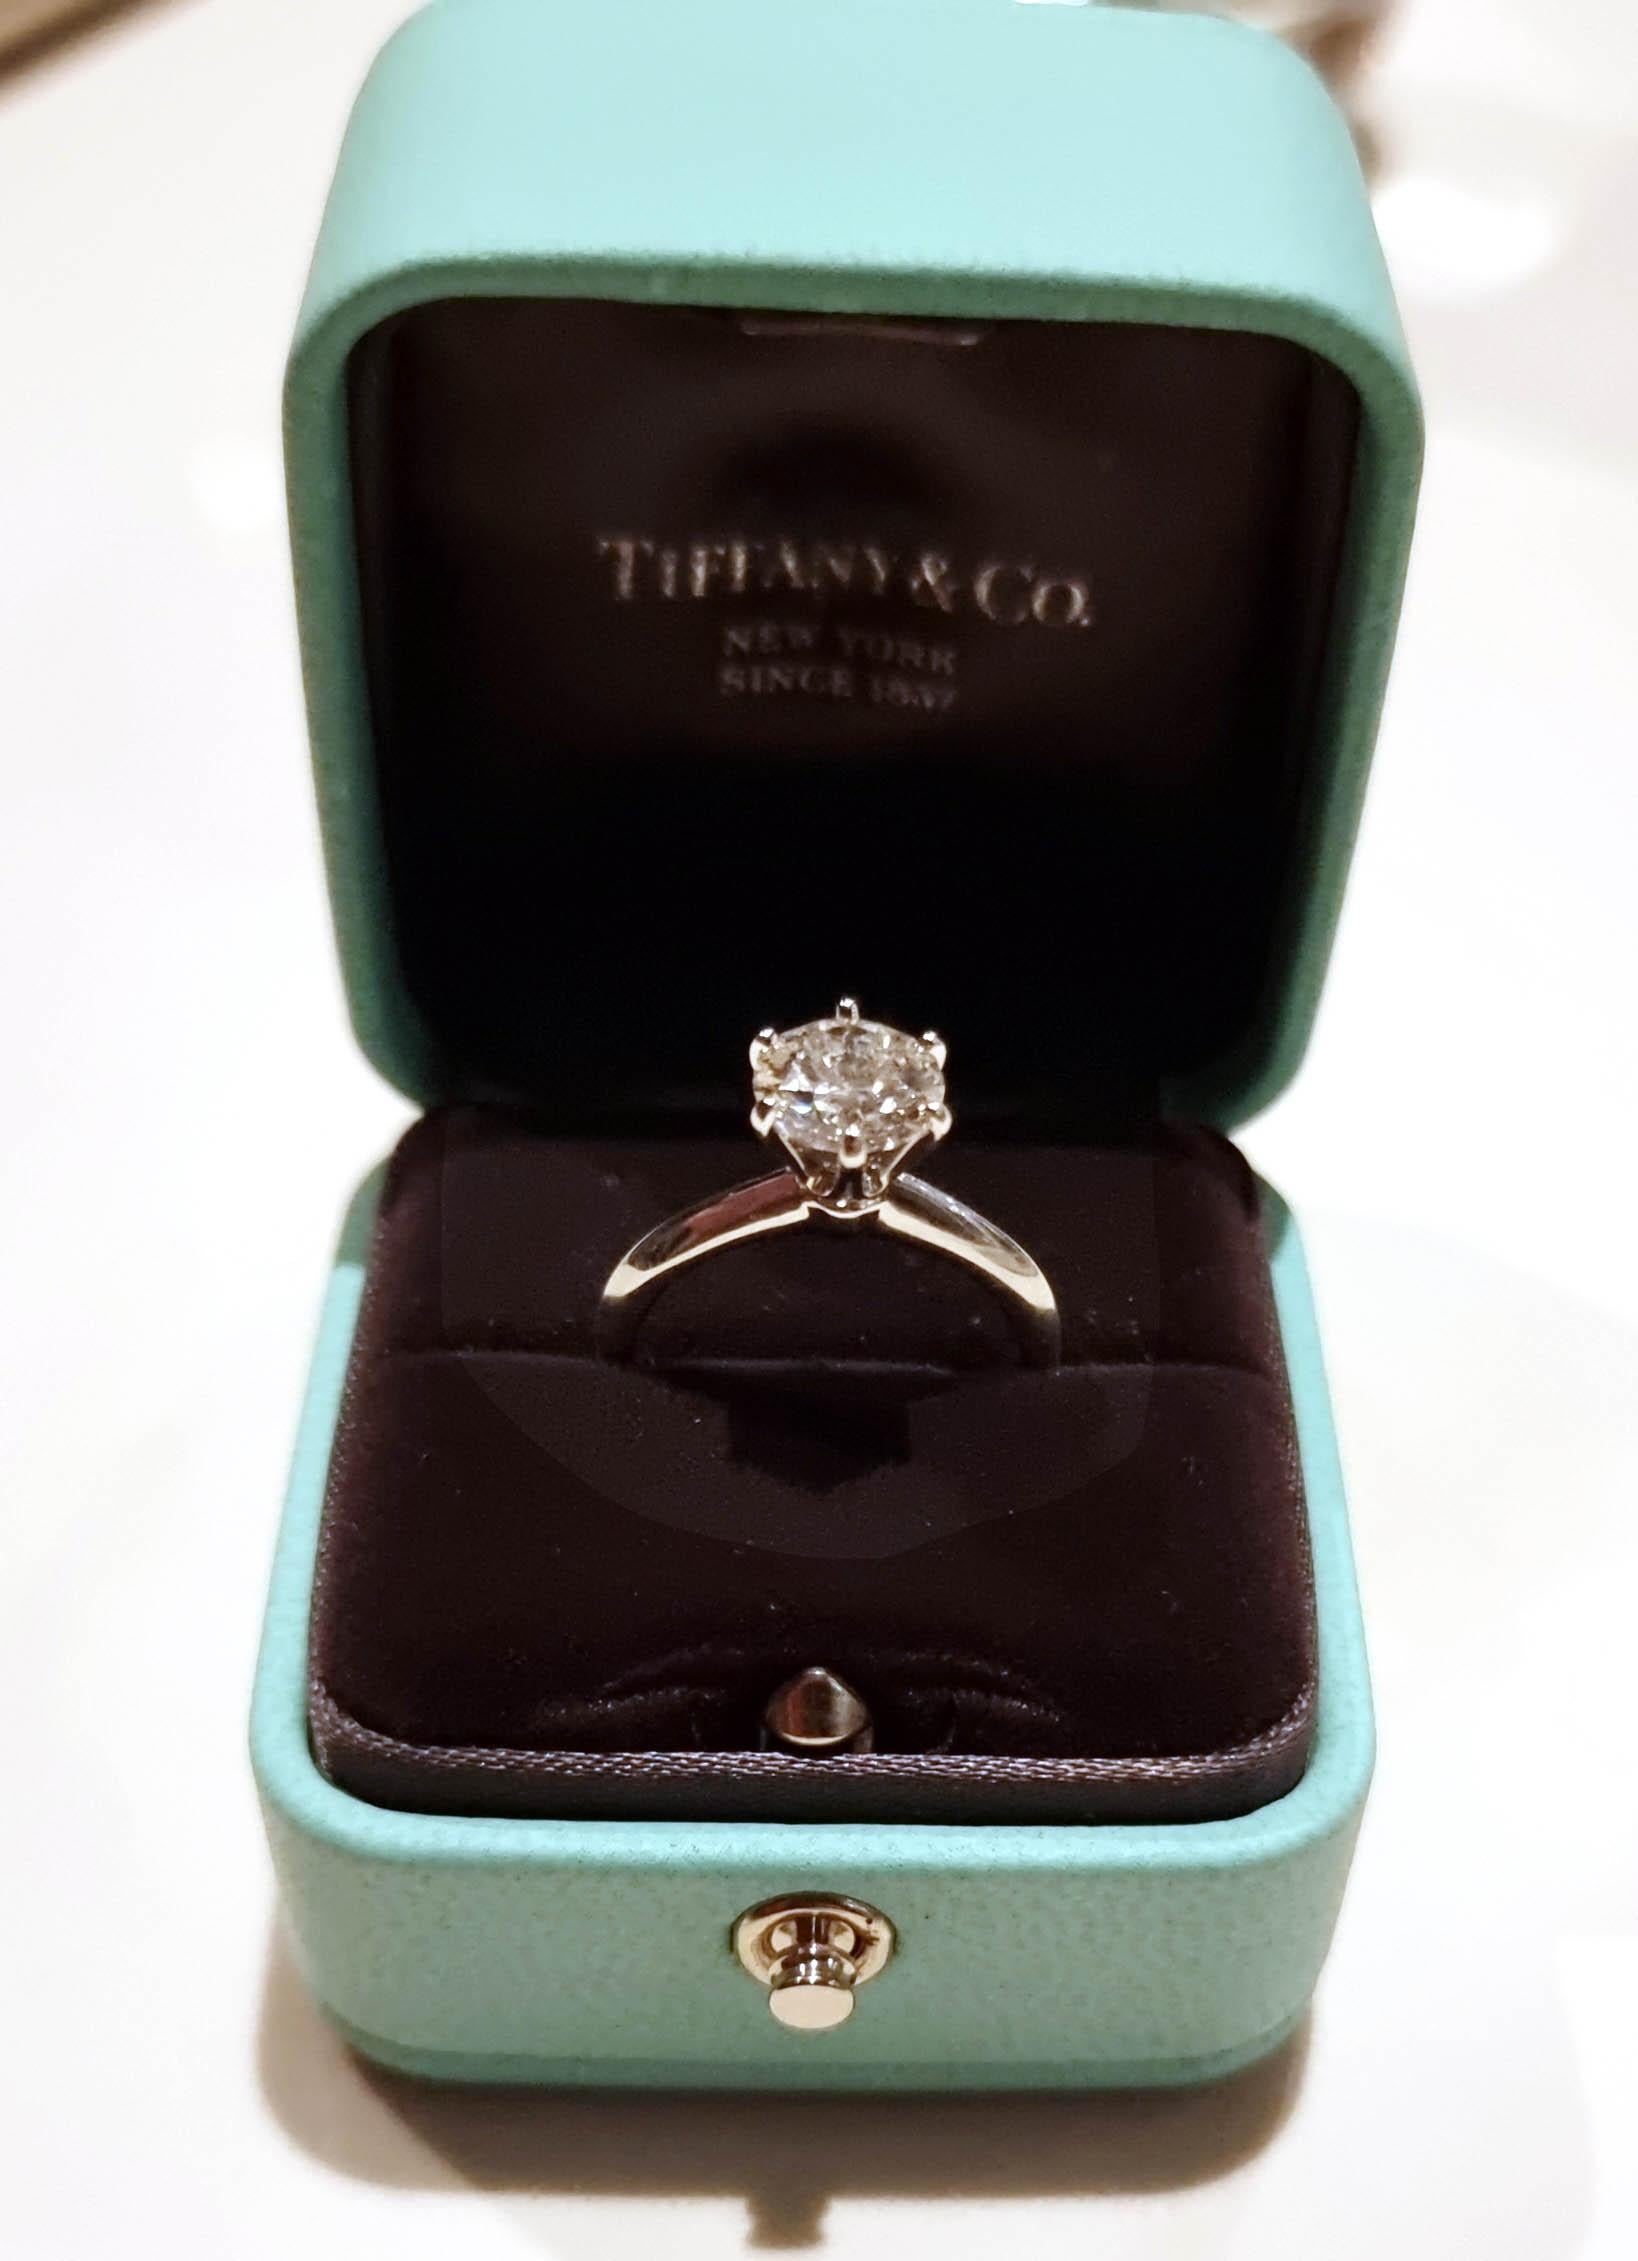 Unique features: 
Tiffany & Co platinum diamond engagement ring 1.64ct.
Metal: Platinum 
Carat: 1.64ct
Colour: I
Clarity: VS1
Cut: Round 
Weight: N/A
Engravings/Markings: Crown inscription T & C0 T& W08130184. The diamond is laser inscribed on the